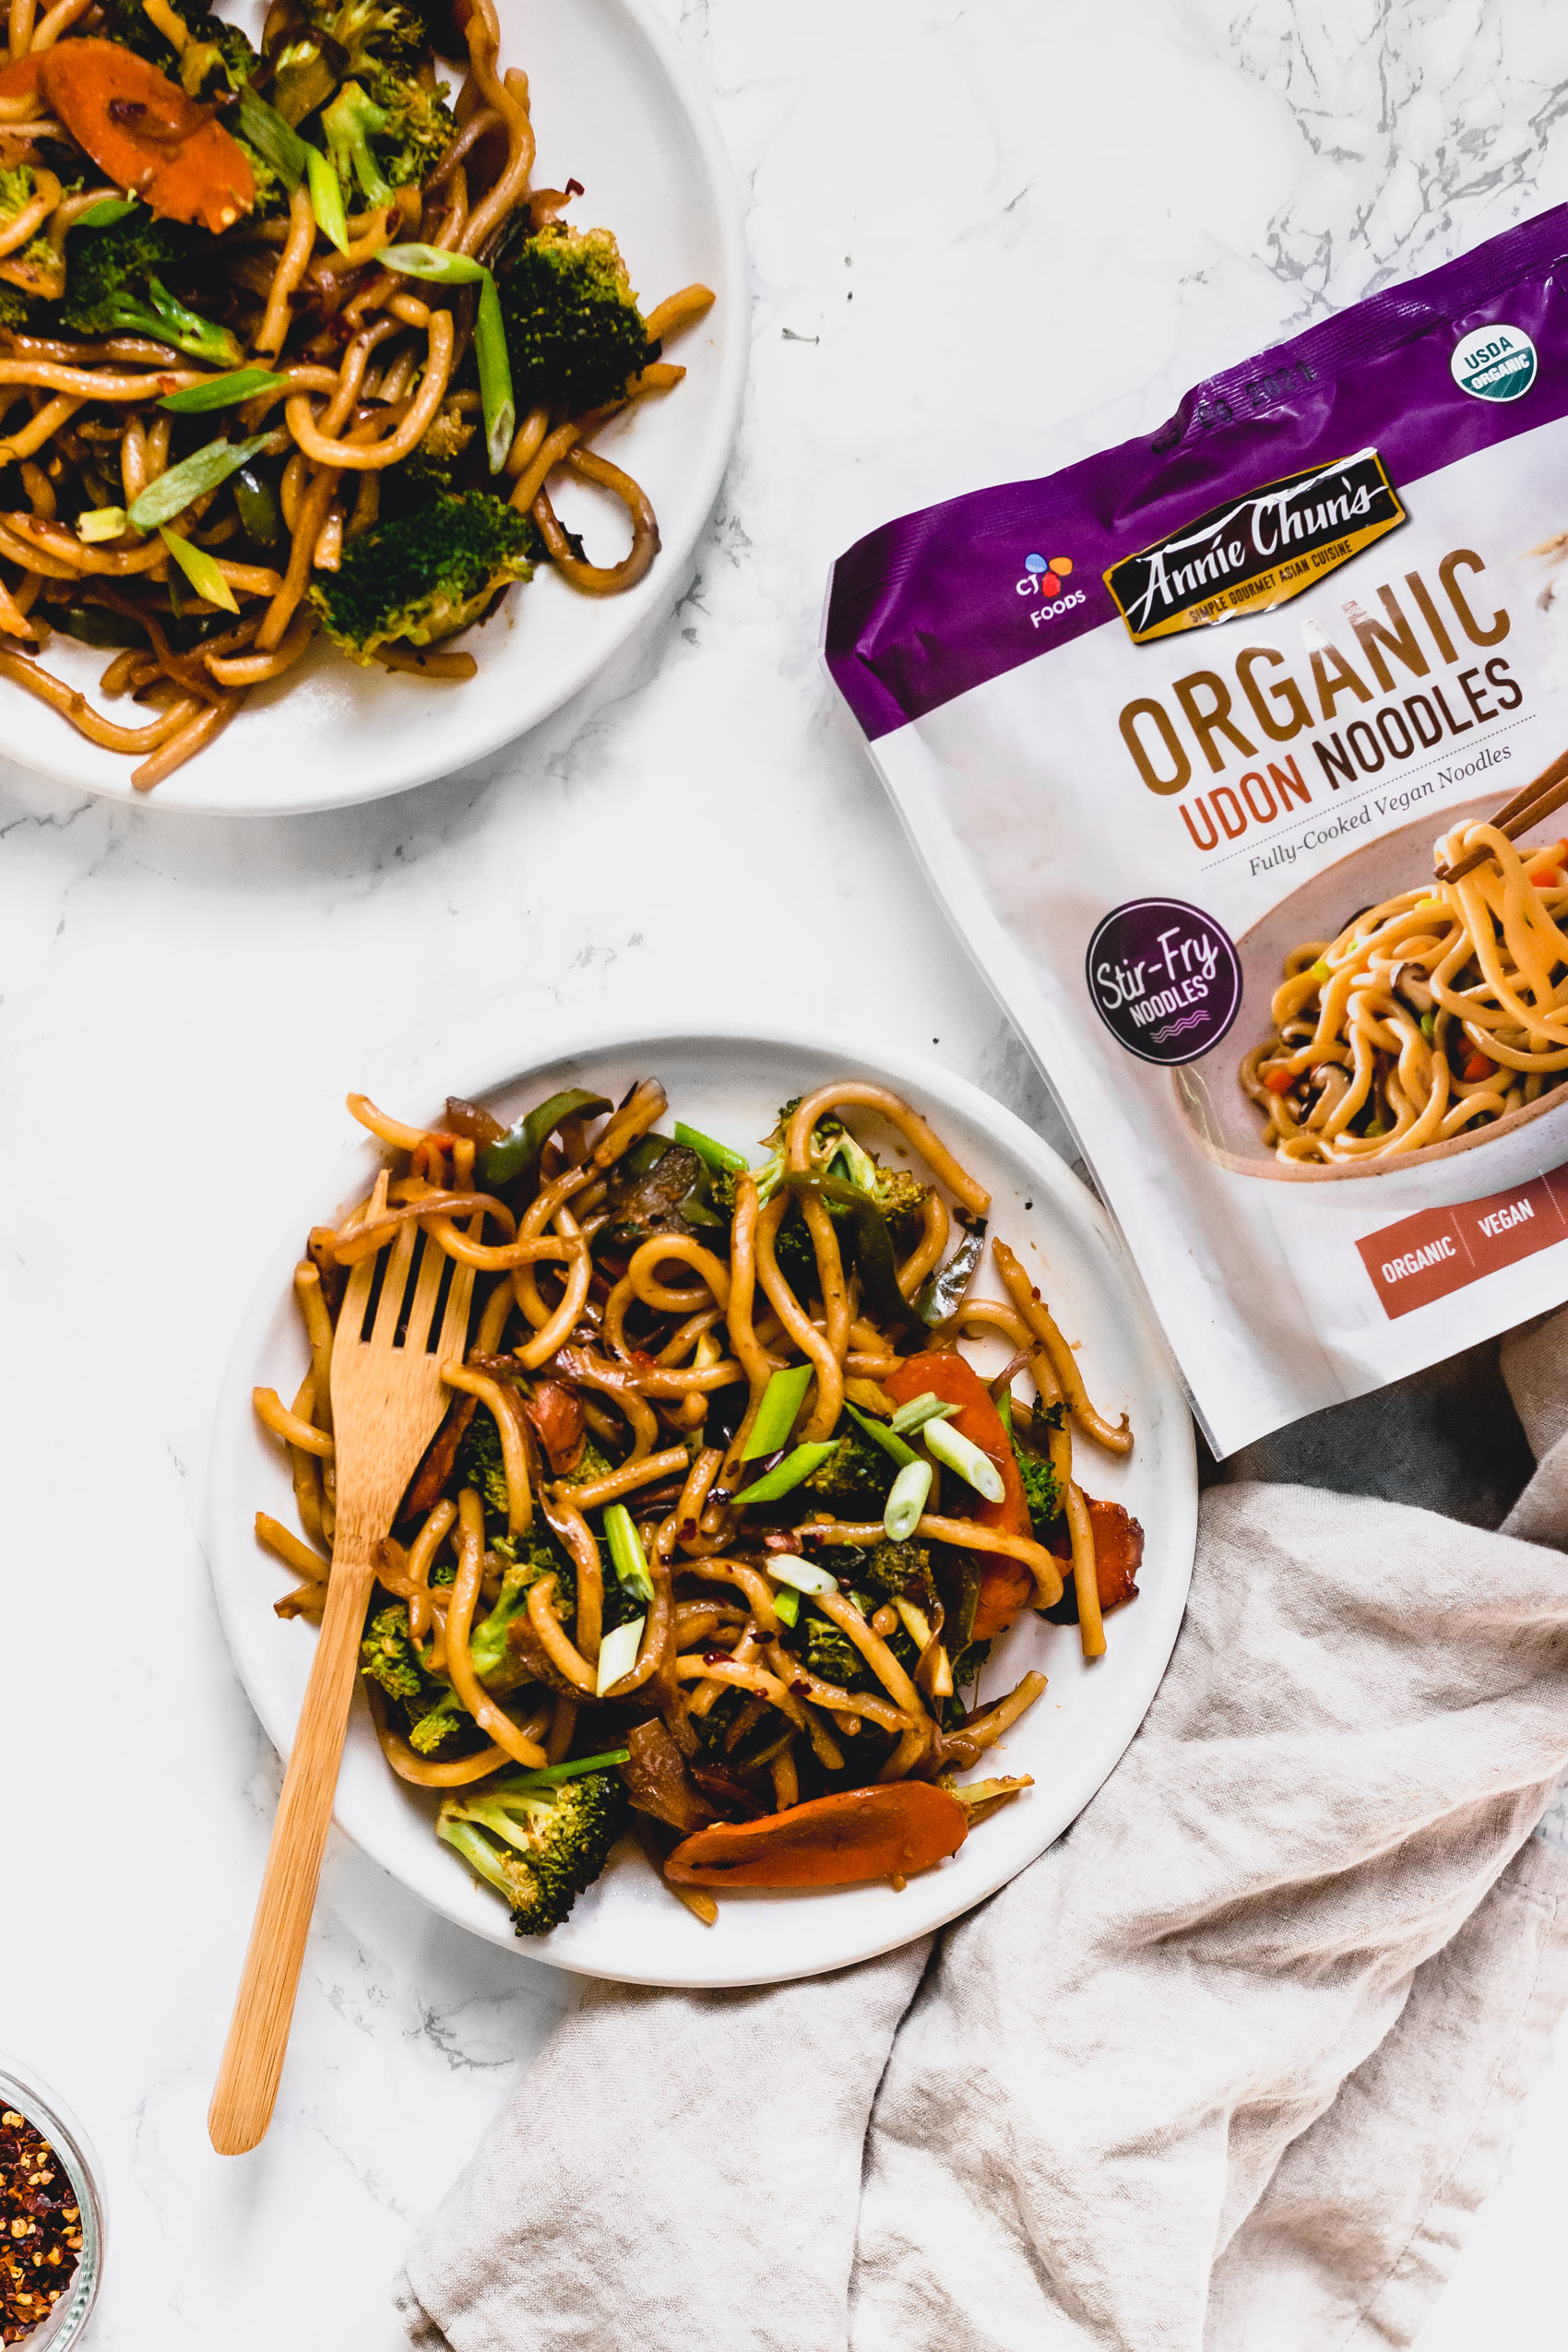 two plates of vegan drunken noodles next to a package of Annie Chun's Organic Udon Noodles